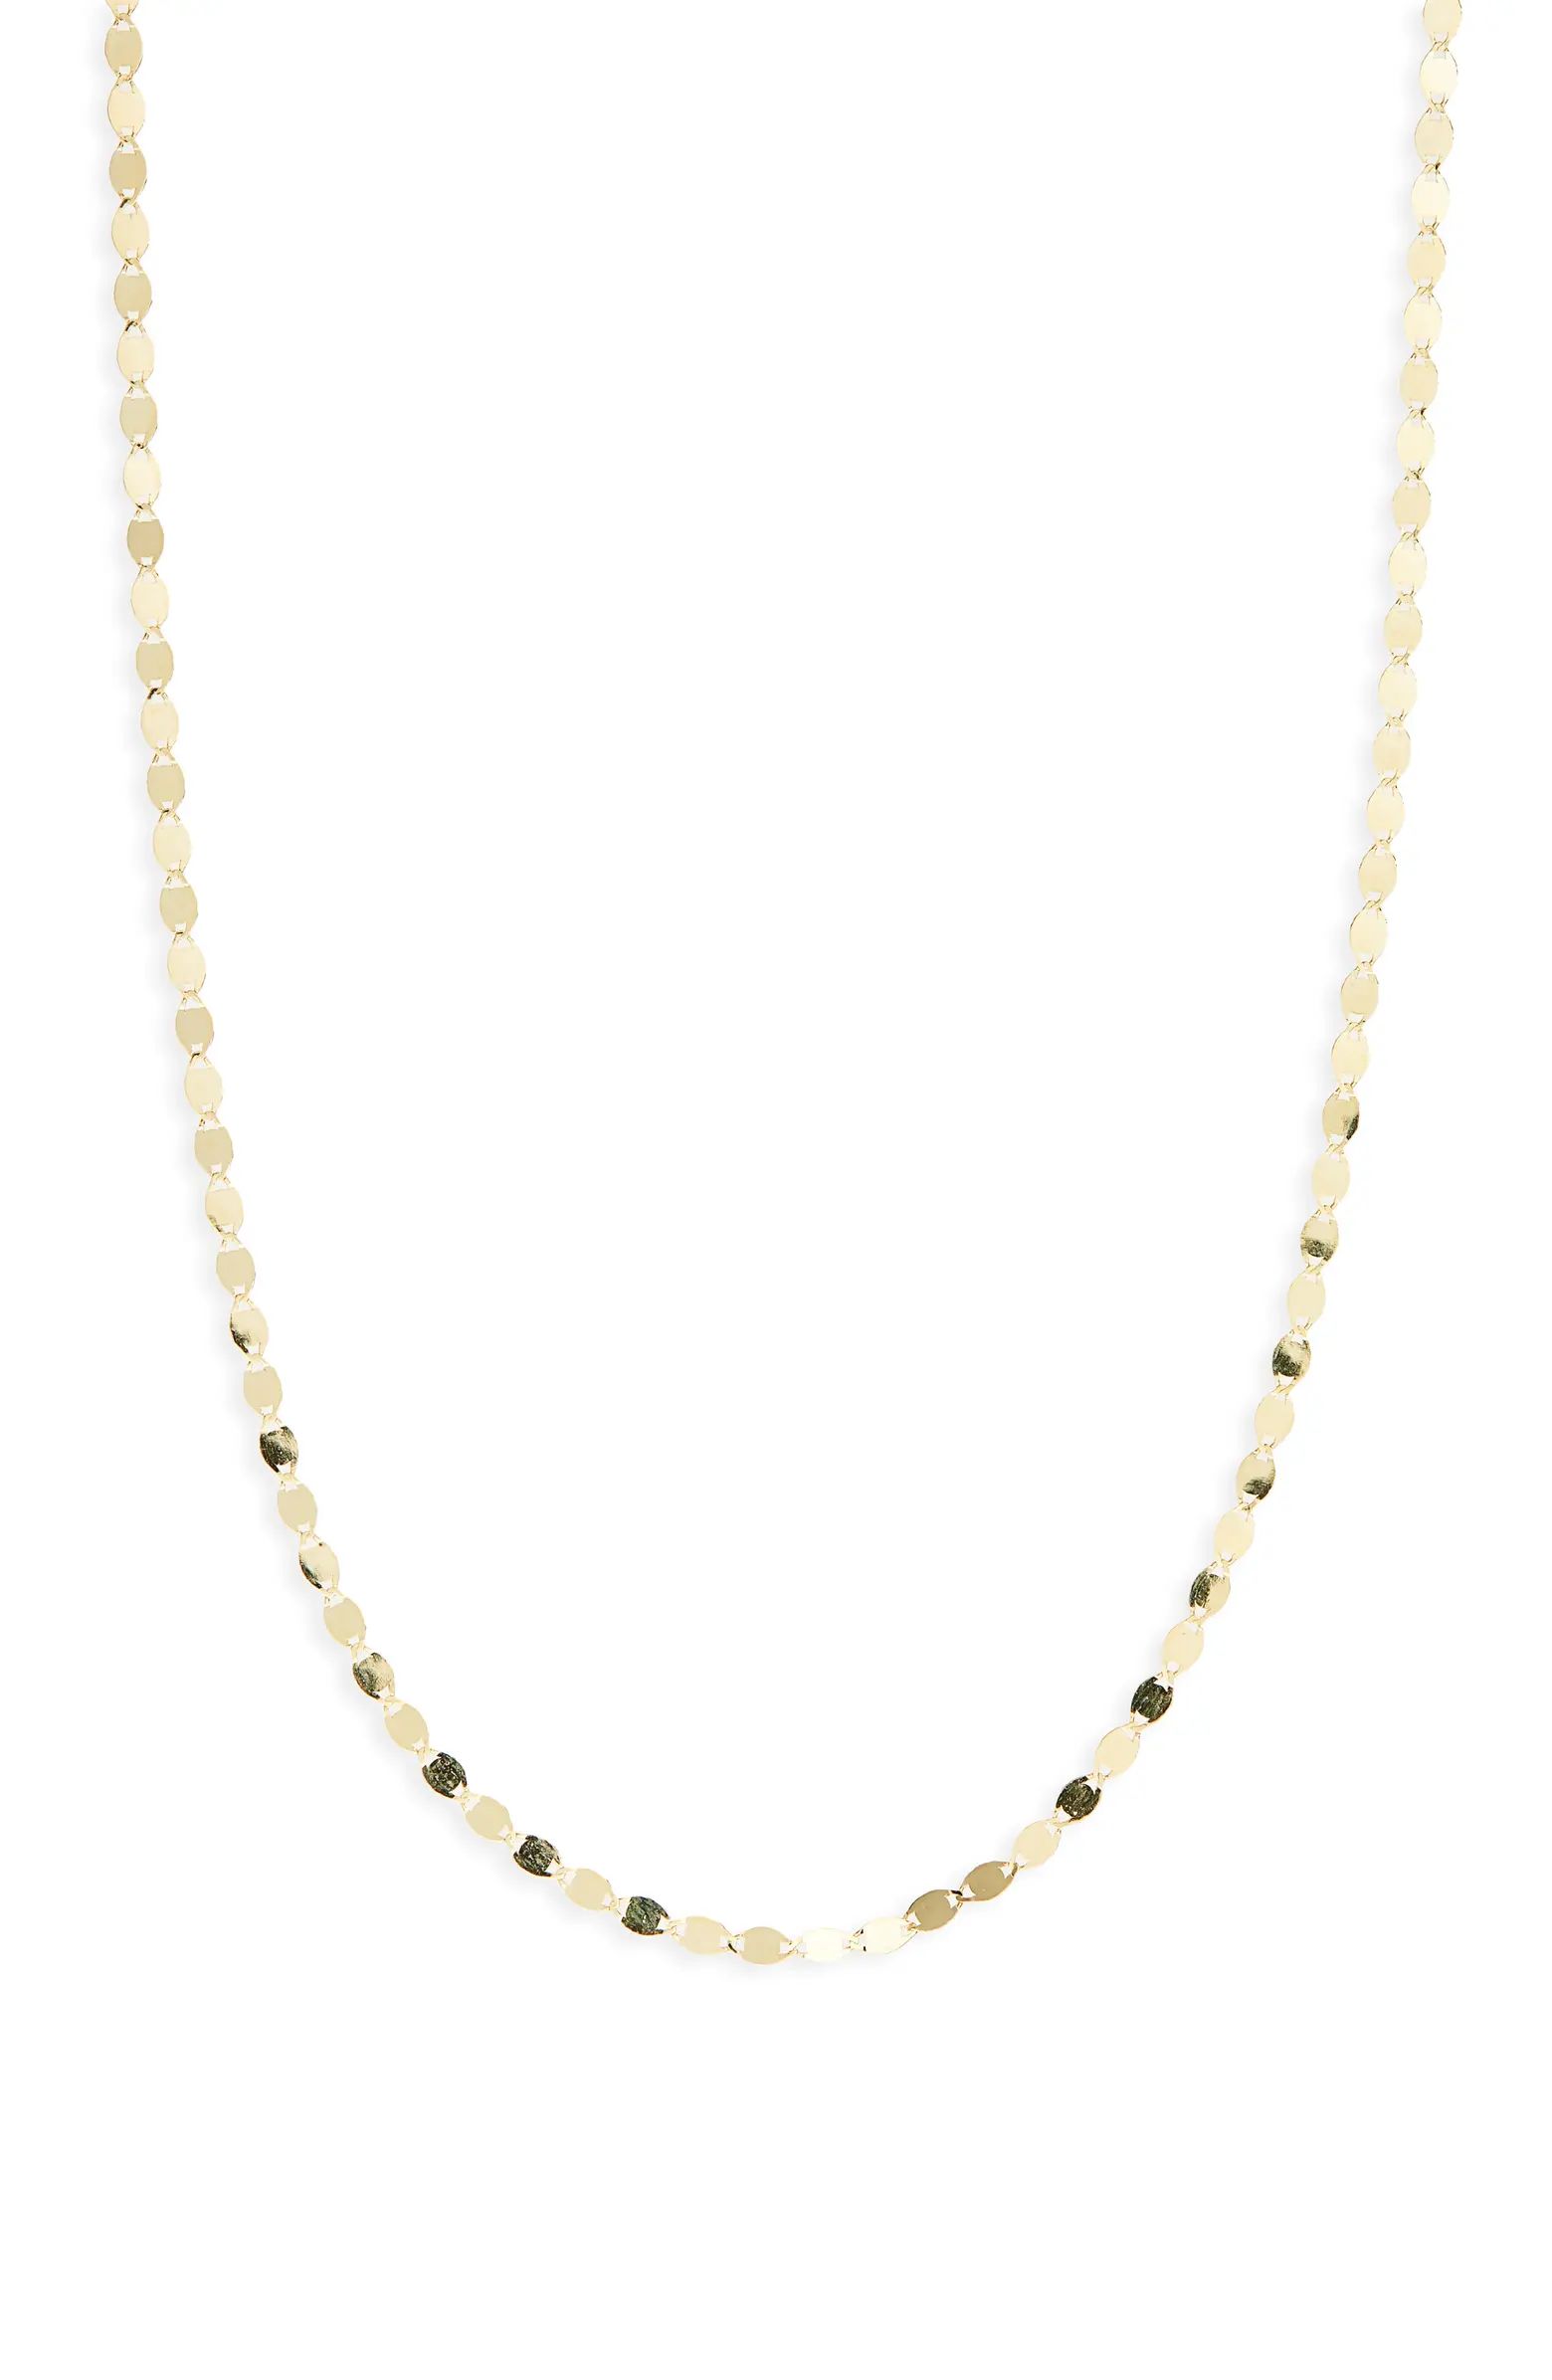 Lana Petite Nude Chain Necklace | Nordstrom | Nordstrom